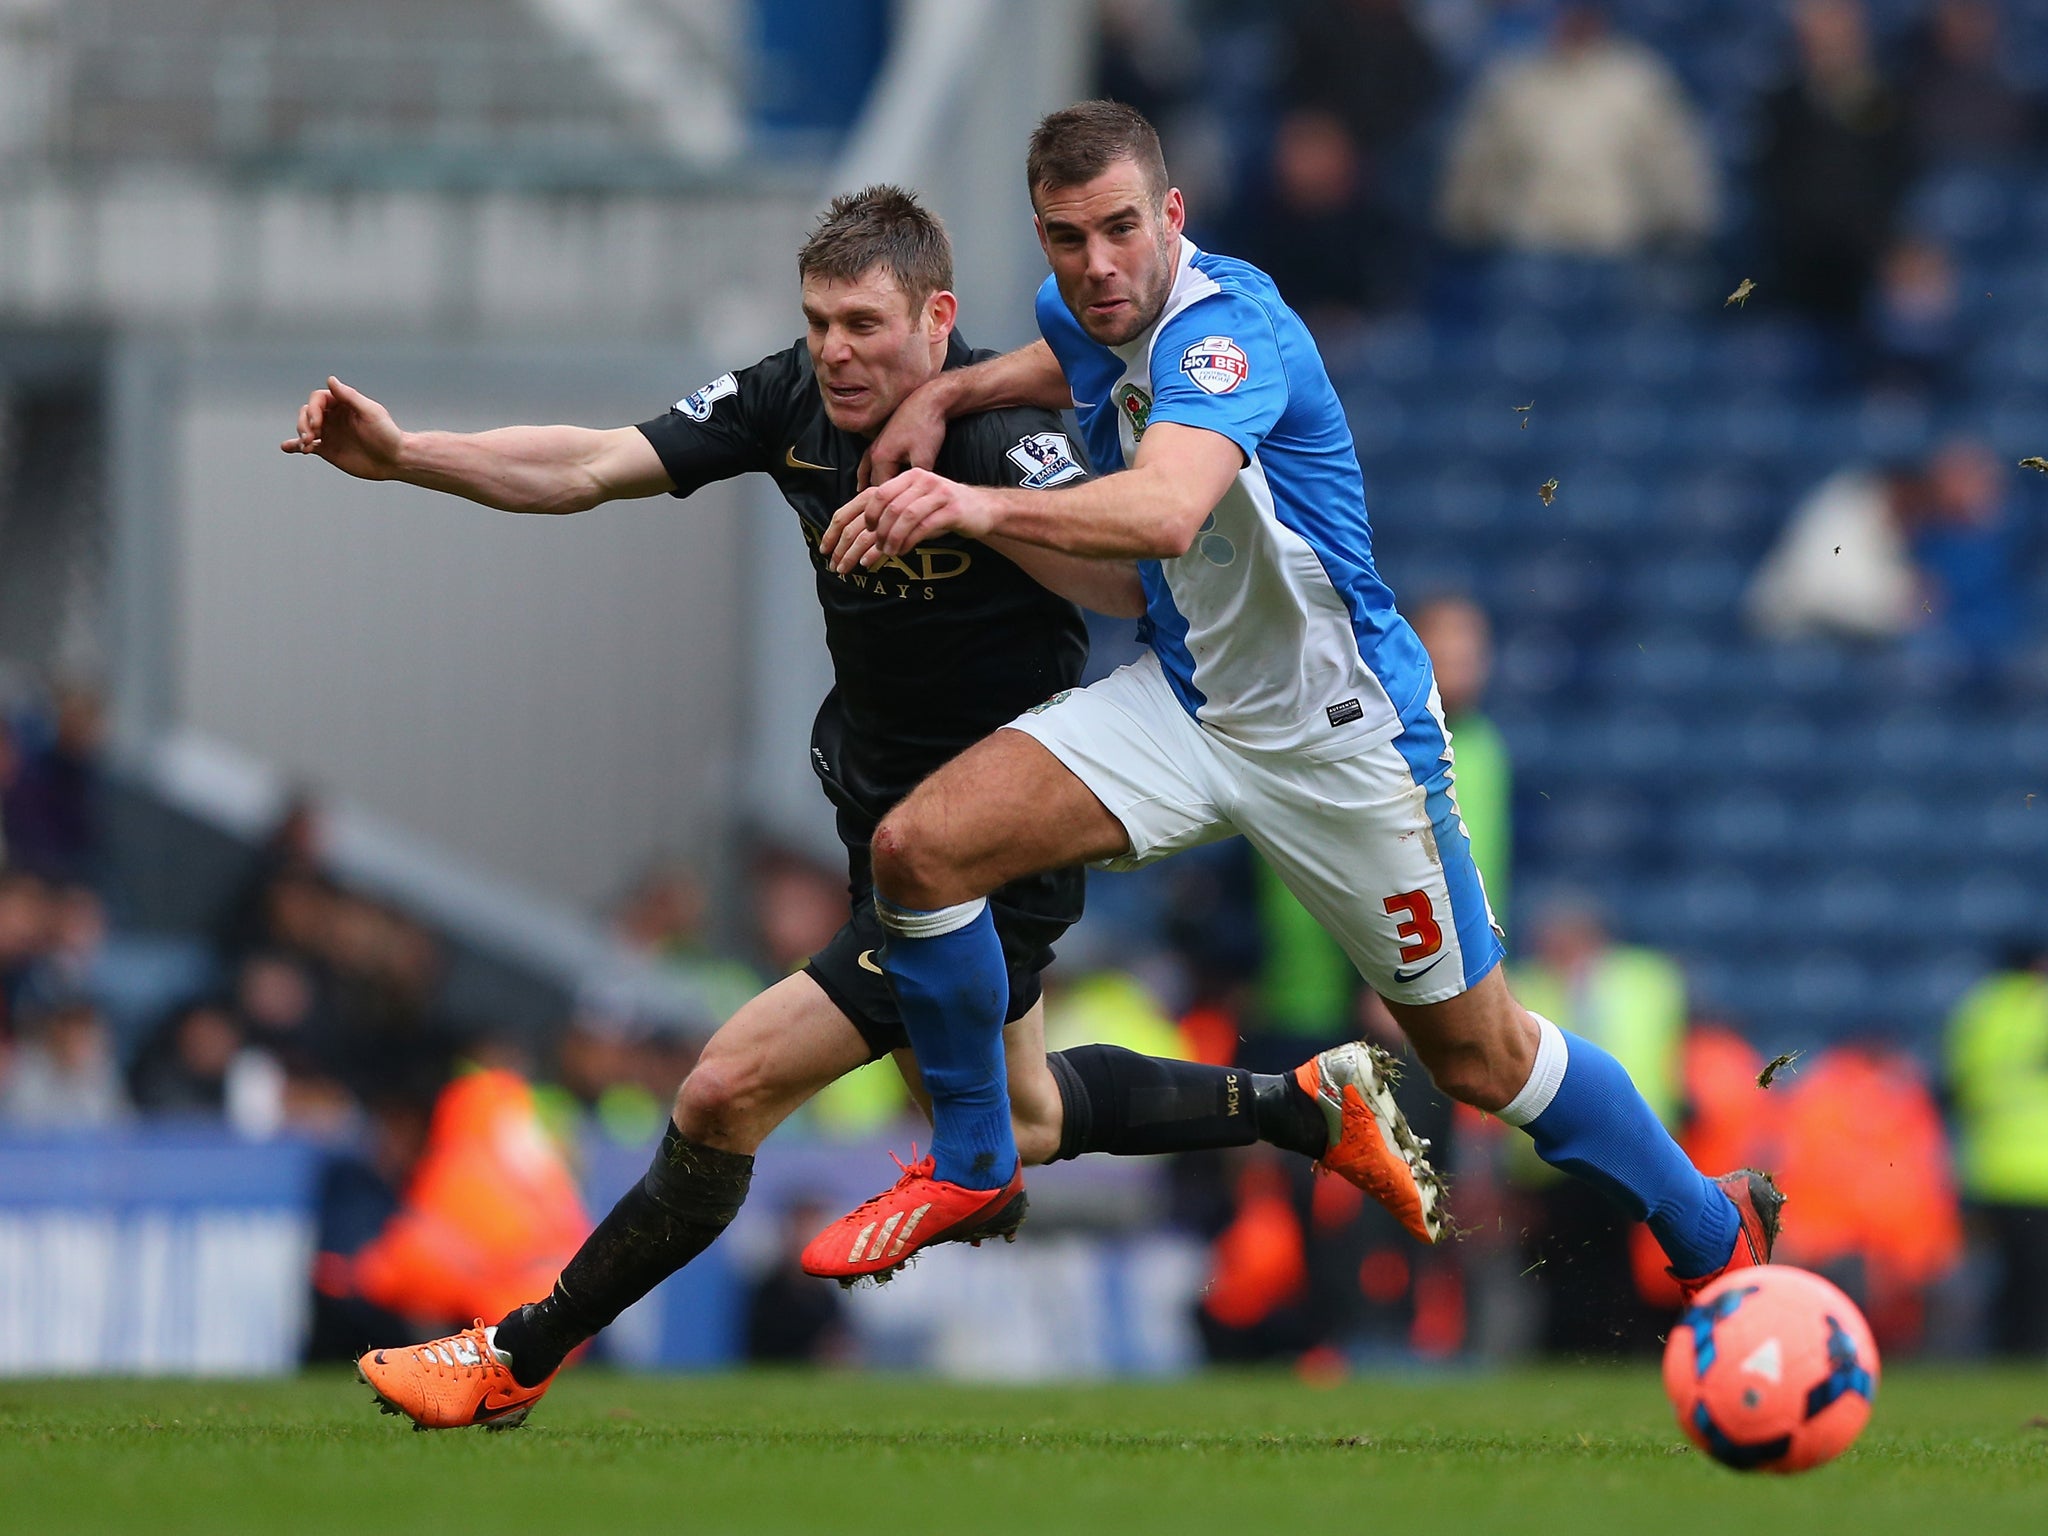 Tommy Spurr of Blackburn Rovers competes with James Milner of Manchester City